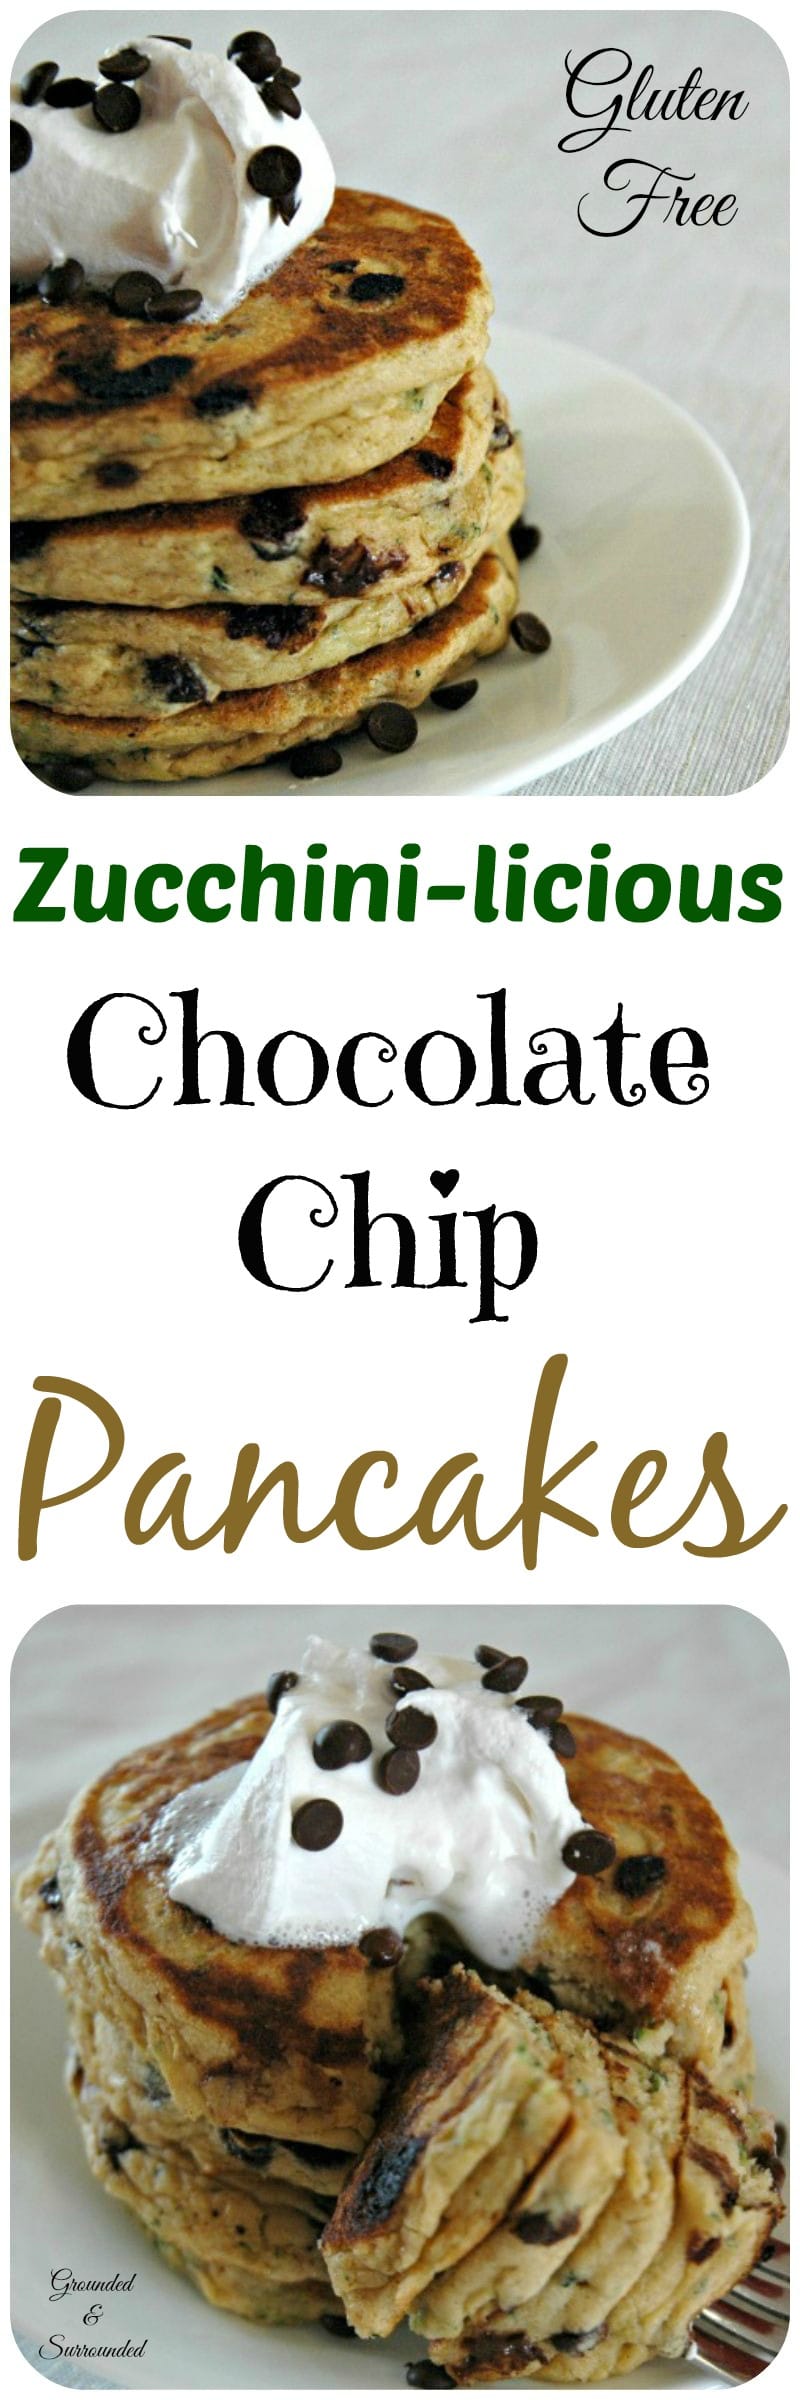 Zucchini has never tasted better! Pancakes will never be the same after you have made these fluffy beauties. These easy pancakes from scratch include a vegetable and chocolate chips and will have your kids begging for more! They are the perfect gluten free breakfast, snack, or dessert. A healthy splurge never hurt anyone! 